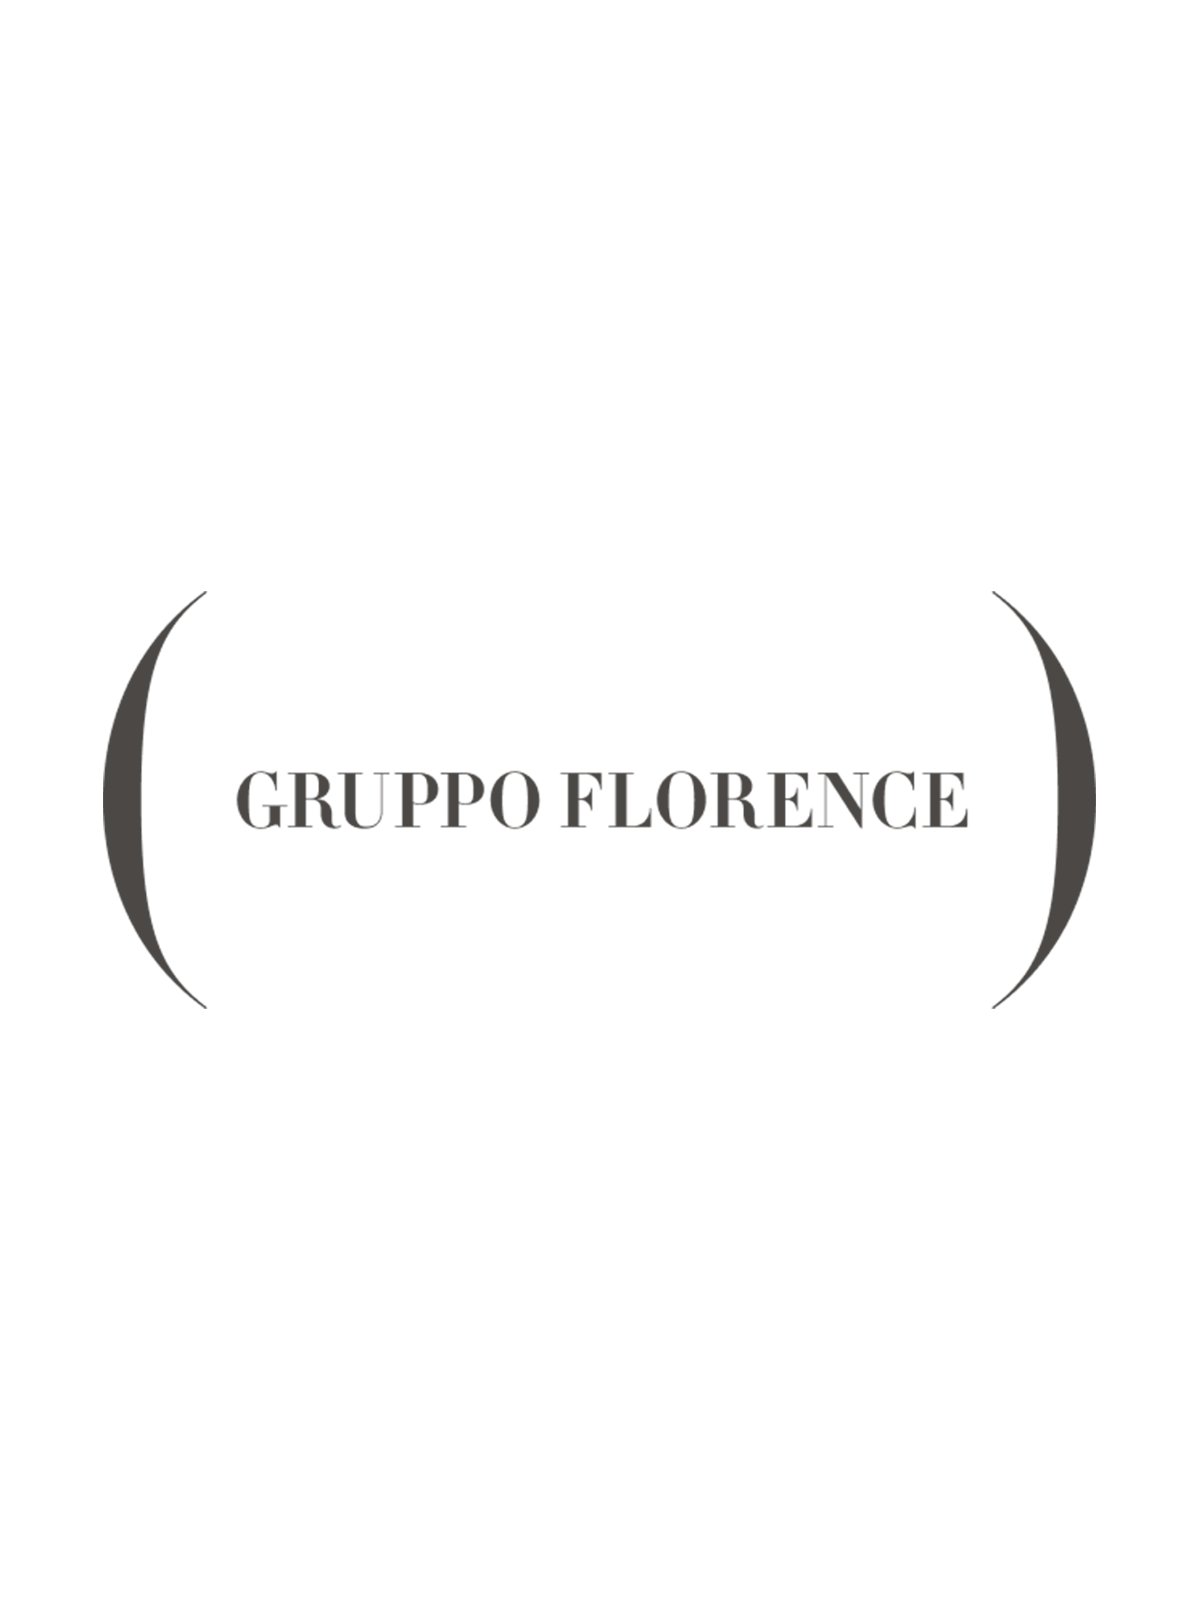 Florence Group inaugurates business unit 